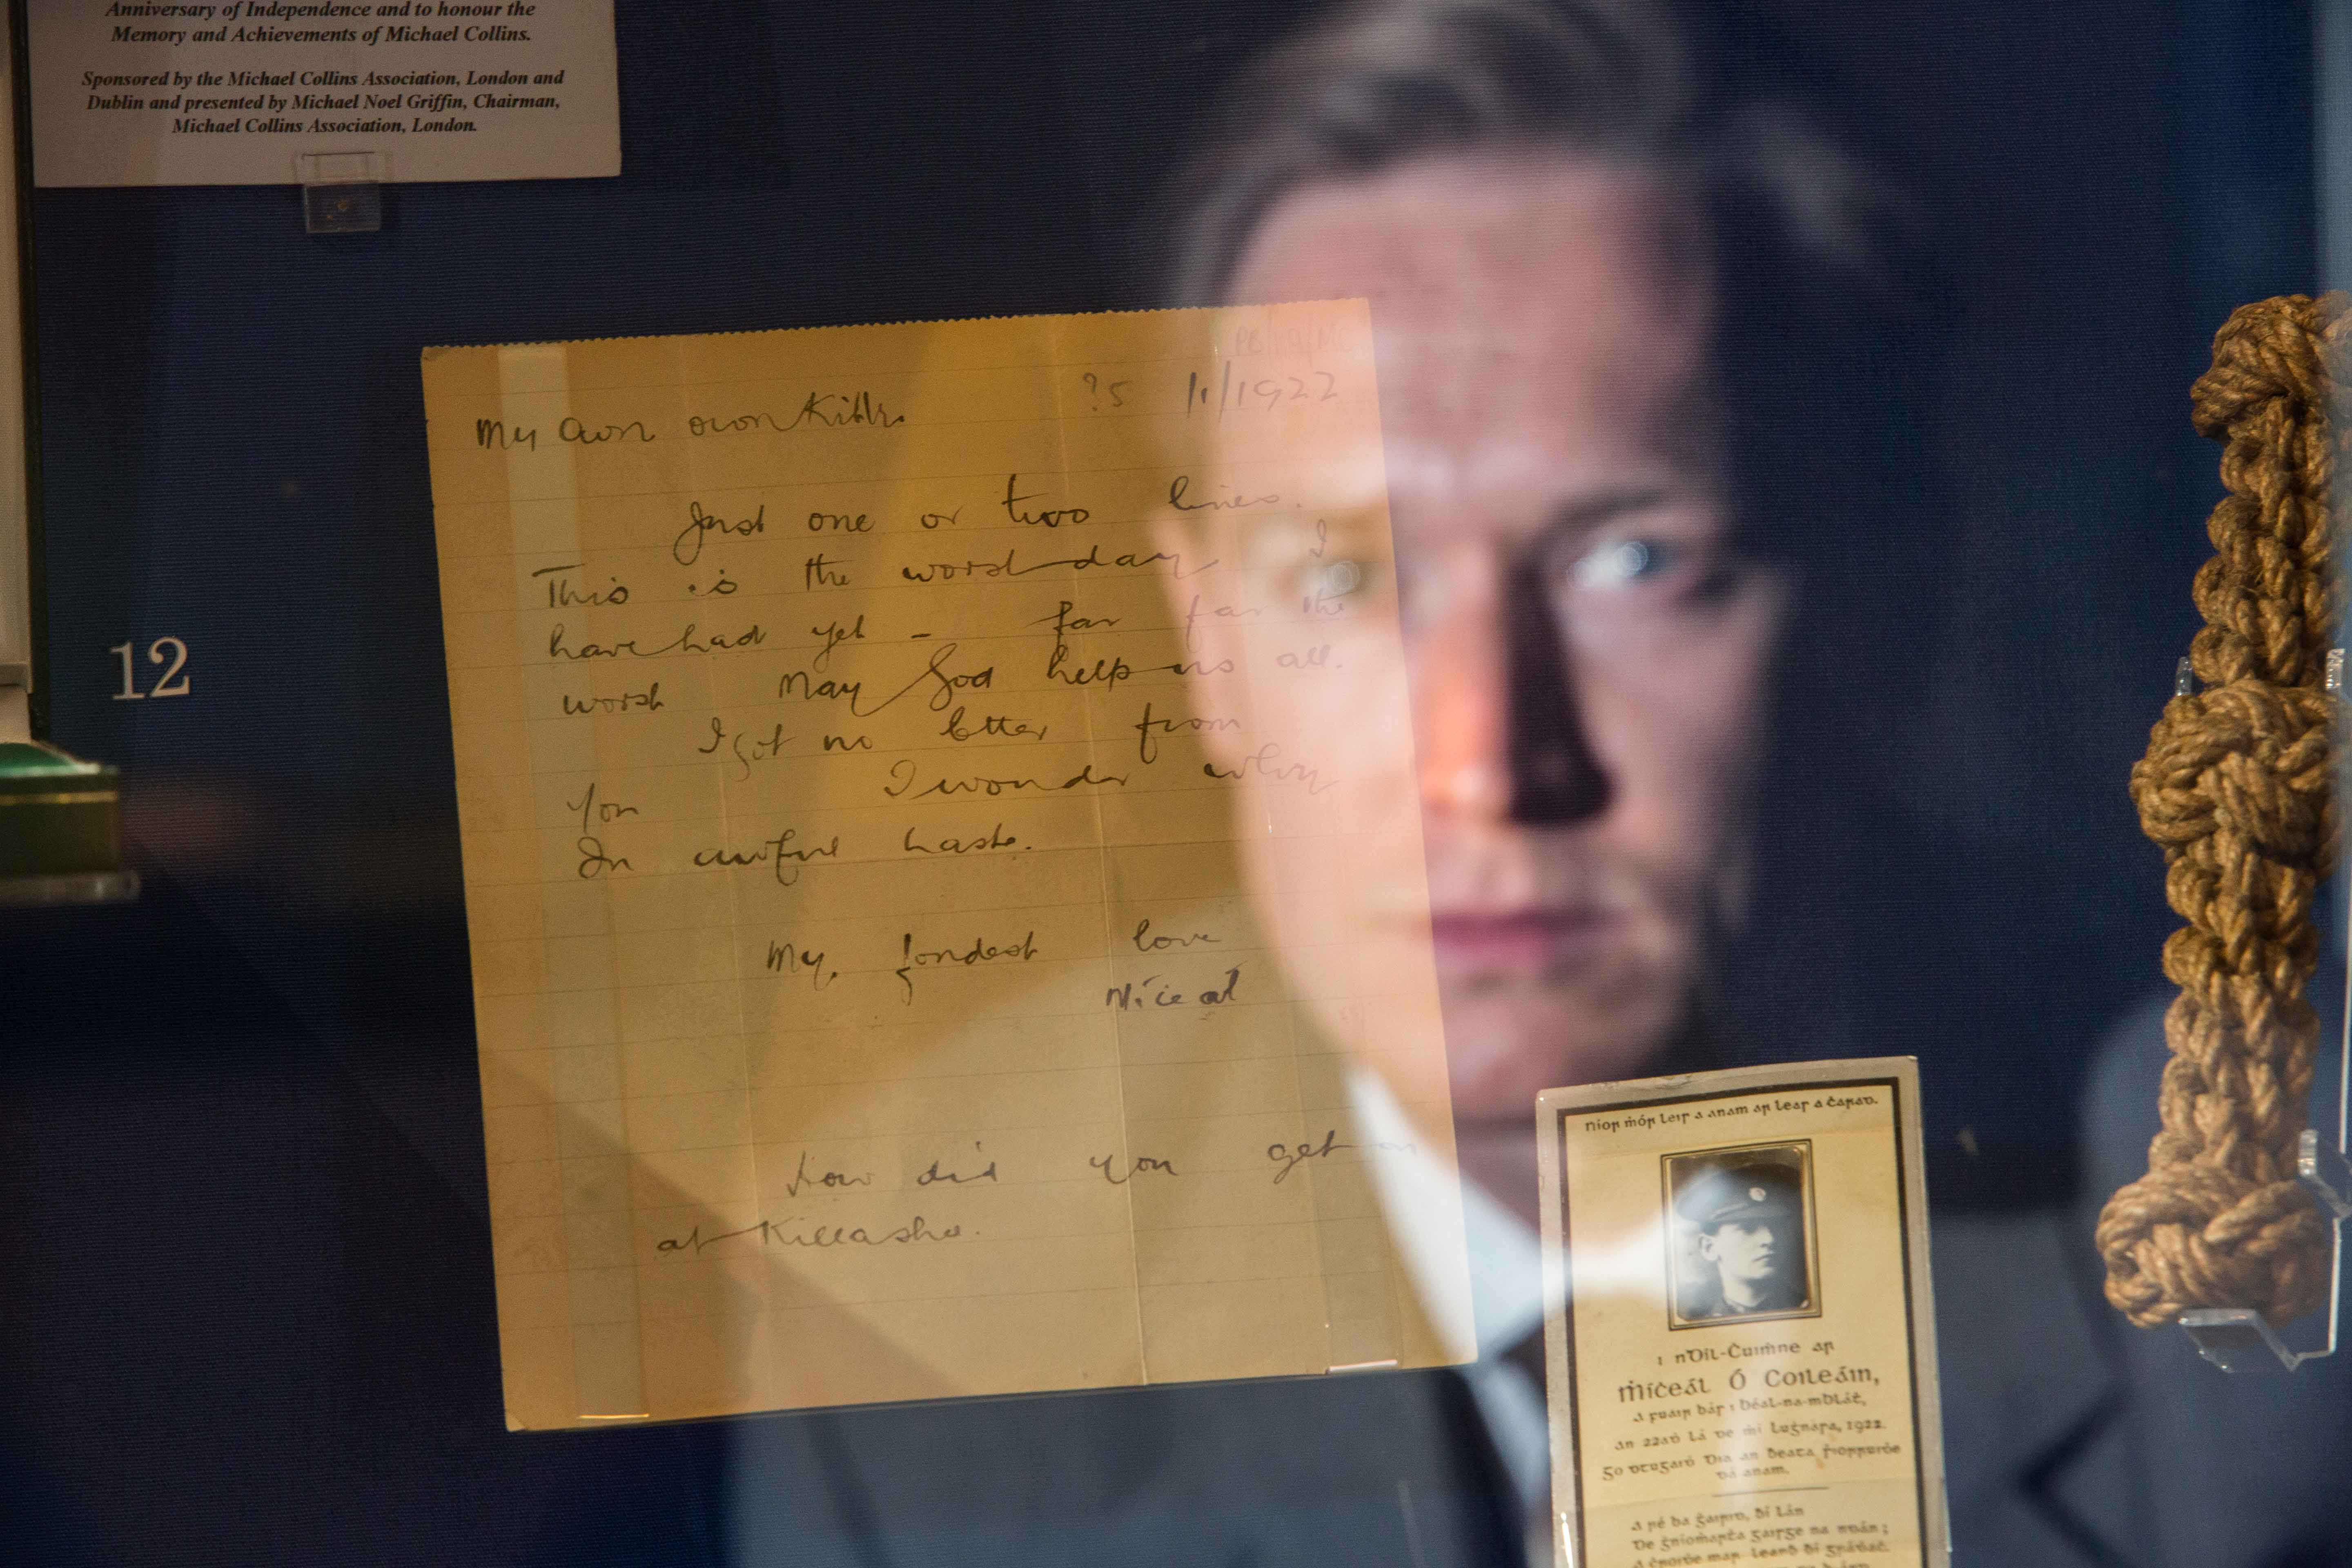 DKANE 16082016 REPRO FREE Dominic MacHale, who plays Michel Collins in "A Great Arrangement” which opens at the Everyman Theatre on Monday, August 22nd, the 94th Anniversary of Collins’ Assassination, reads the original letters between Collins and Kitty Kiernan in Cork City Museum. The play draws from the correspondence between the famous lovers. “A Great Arrangement” will be at the Gaiety Theatre, Dublin, for one week only from September 12th. Pic Darragh Kane